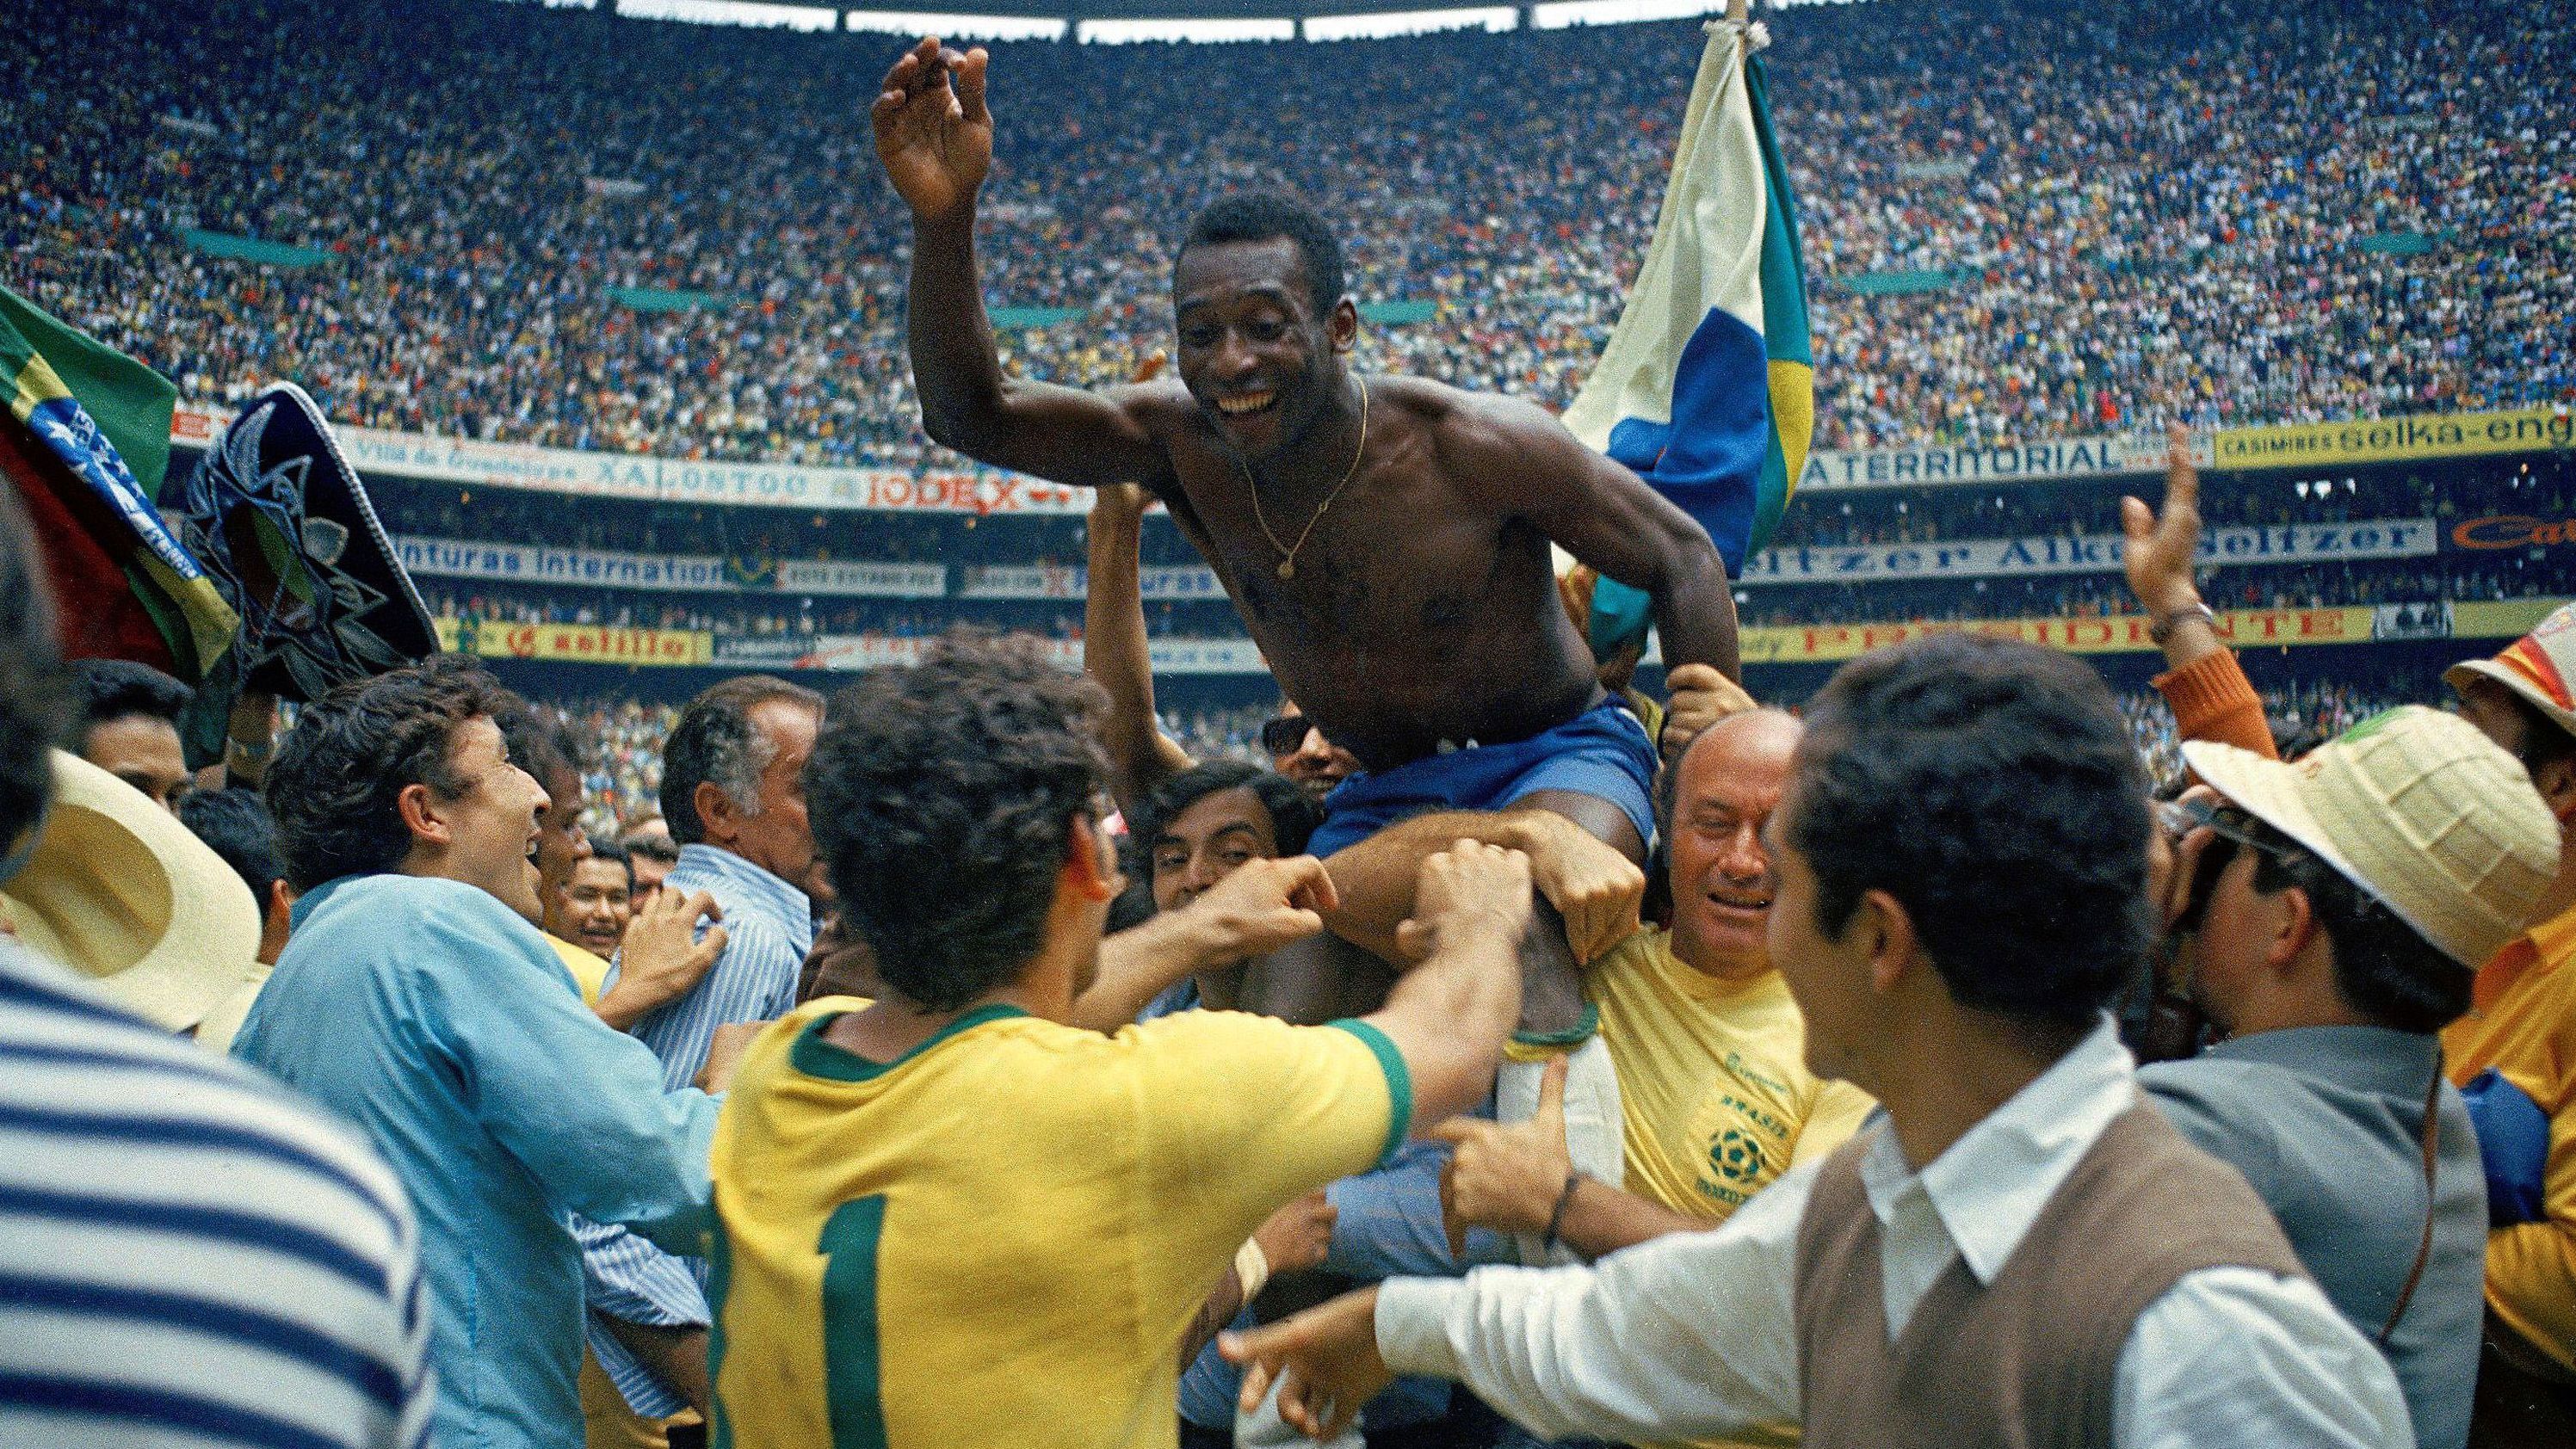 <a href="https://www.cnn.com/2022/12/29/football/brazil-pele-soccer-died-intl-latam-spt/index.html" target="_blank">Pelé,</a> the Brazilian soccer legend who won three World Cups and became the sport's first global icon, died Thursday, December 29, at the age of 82.